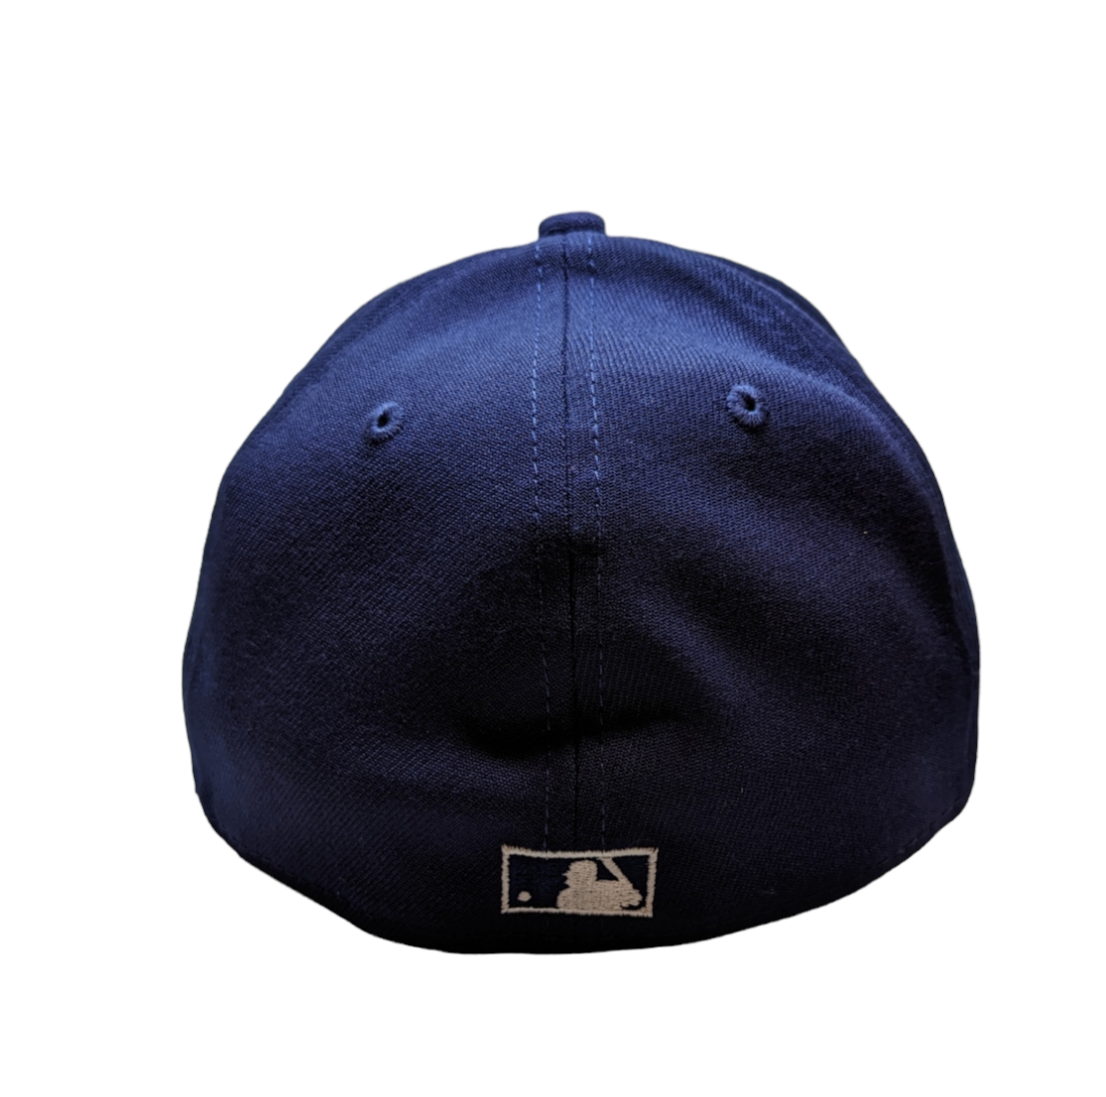 Chicago White Sox Classic 1929 Cooperstown Collection Navy 39THIRTY Flex Fit New Era Hat